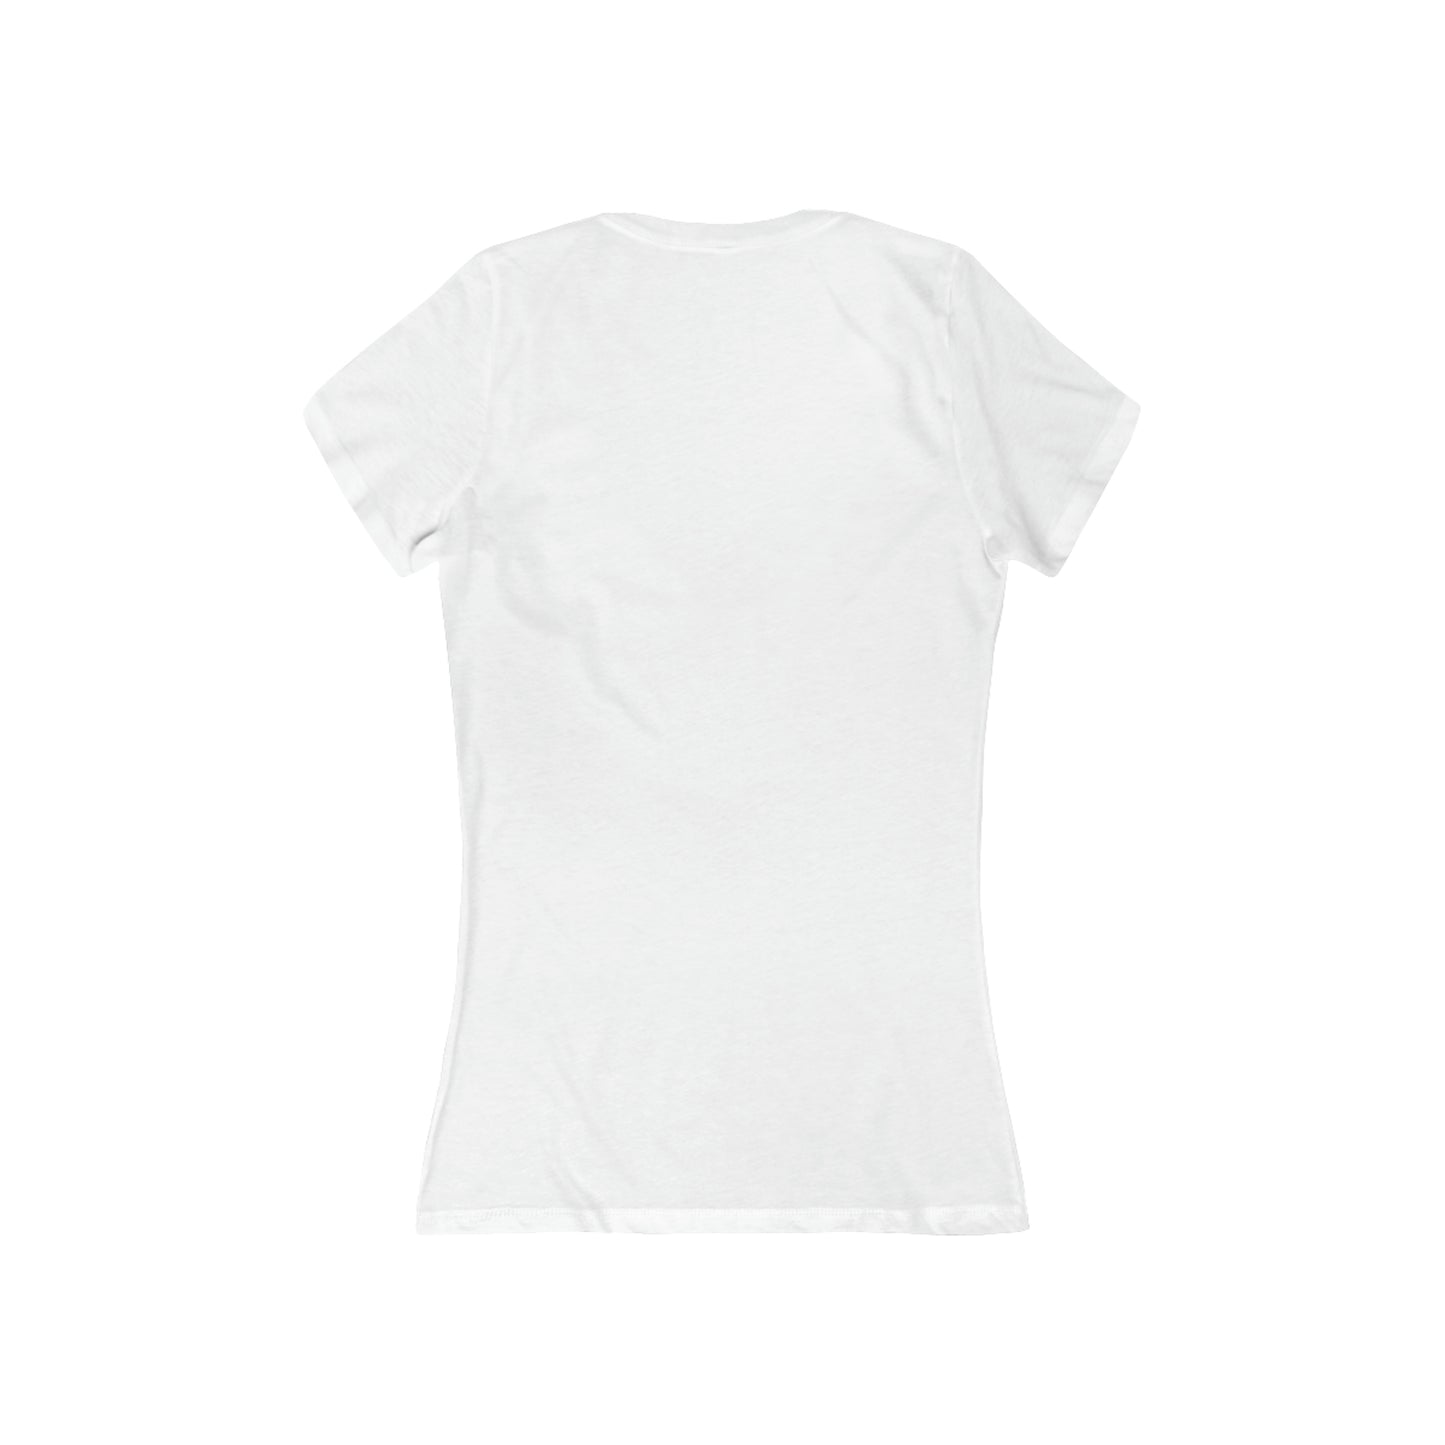 'Introverted but will talk pottery' - Women's Jersey Short Sleeve Deep V-Neck Tee